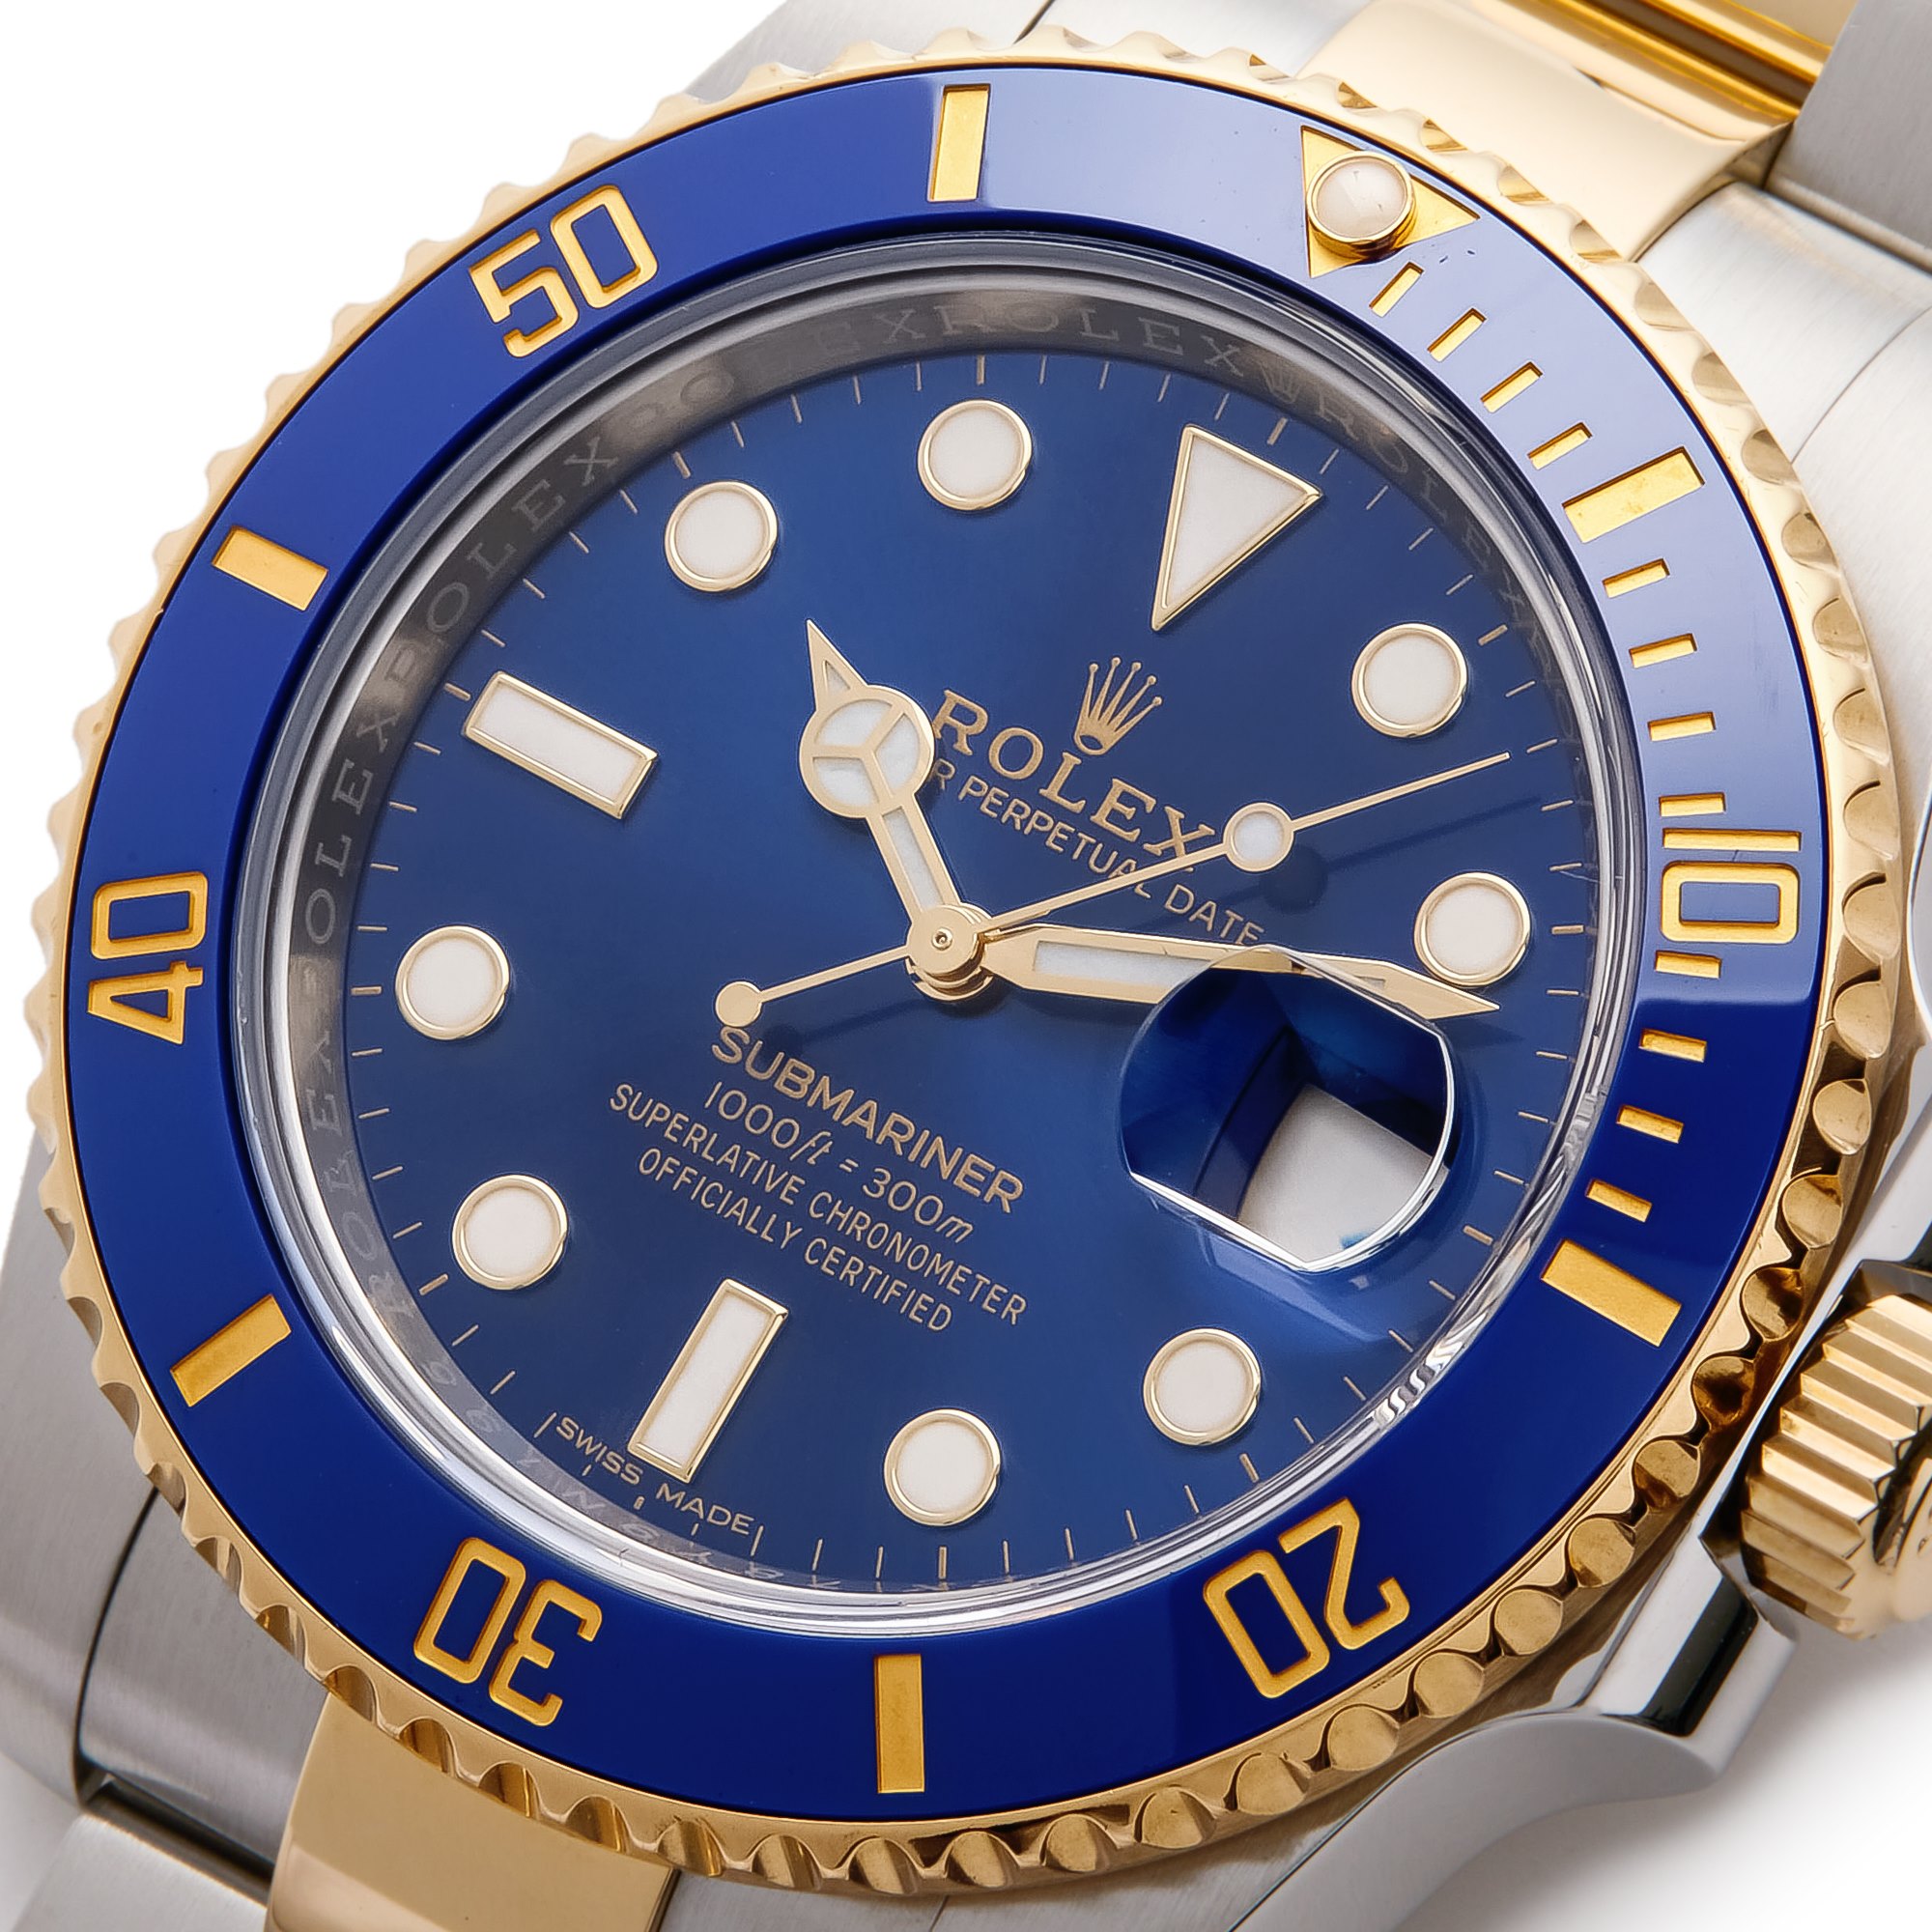 Rolex Submariner Date Stainless Steel 116613LB